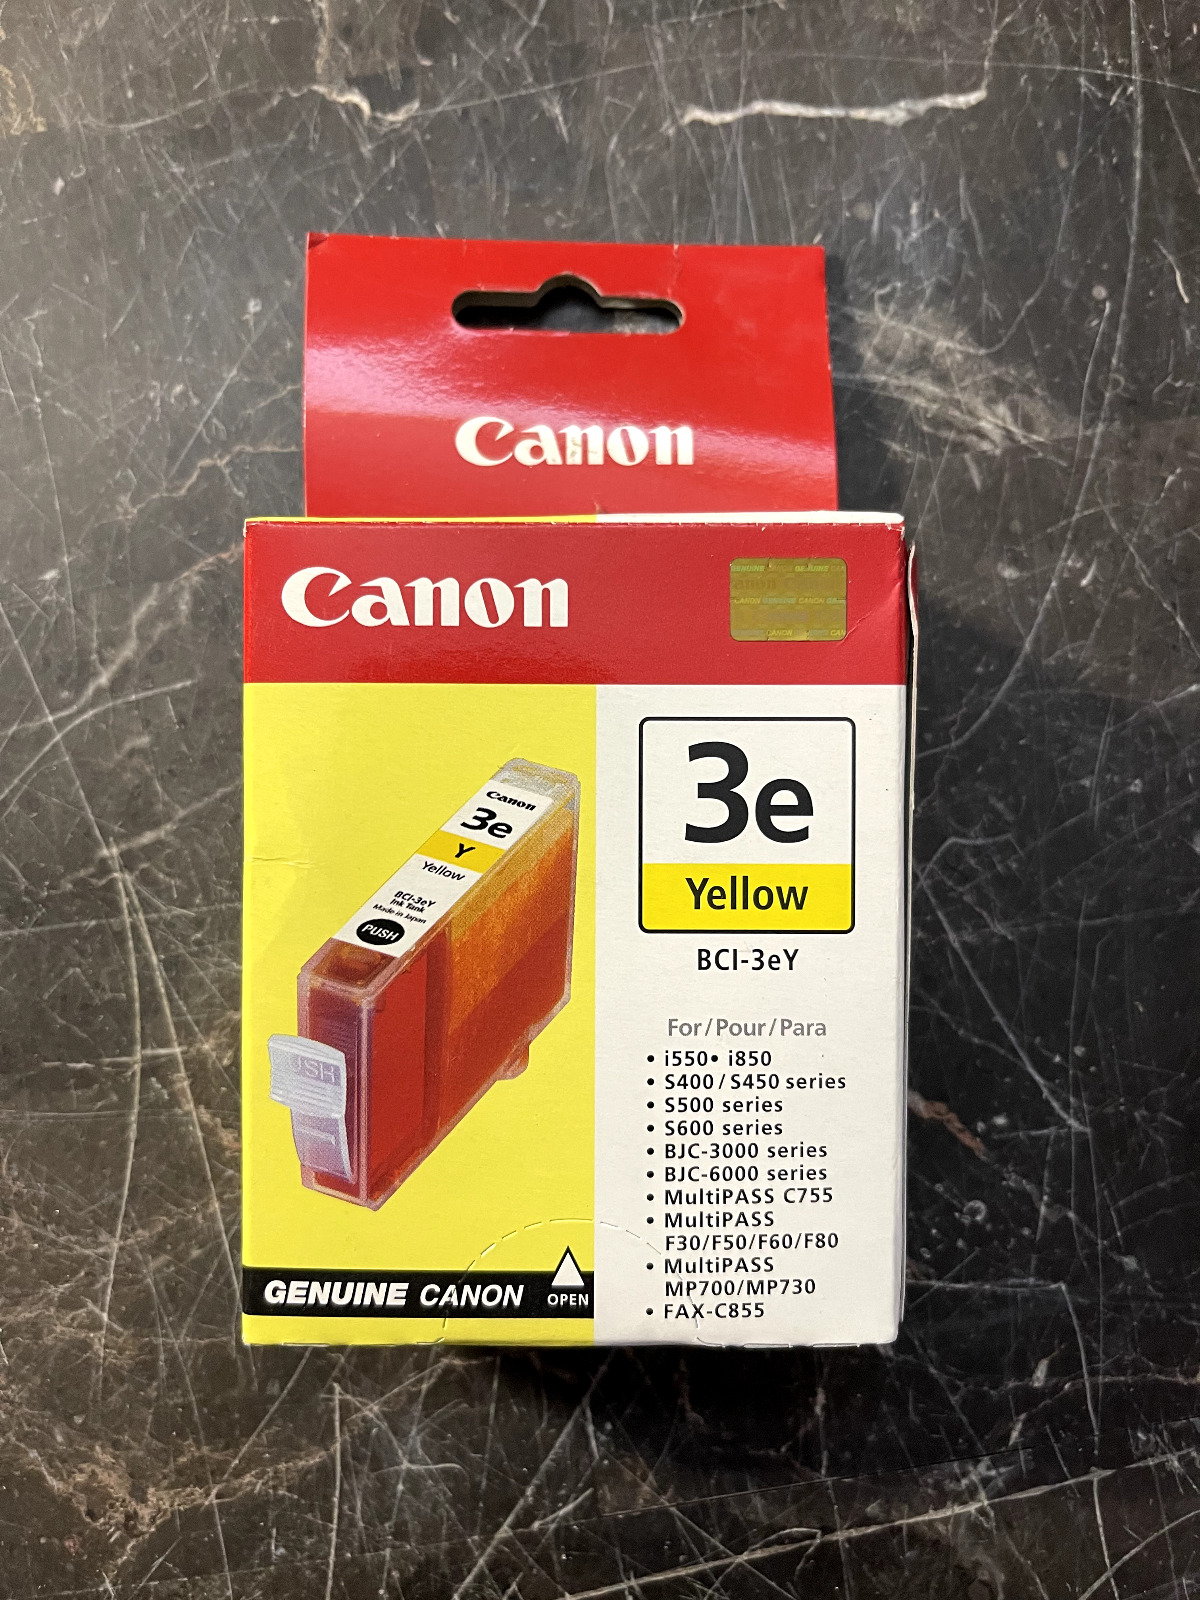 Canon BCI-3e BCI-3eY Yellow Ink Cartridge GENUINE NEW SEALED BOX